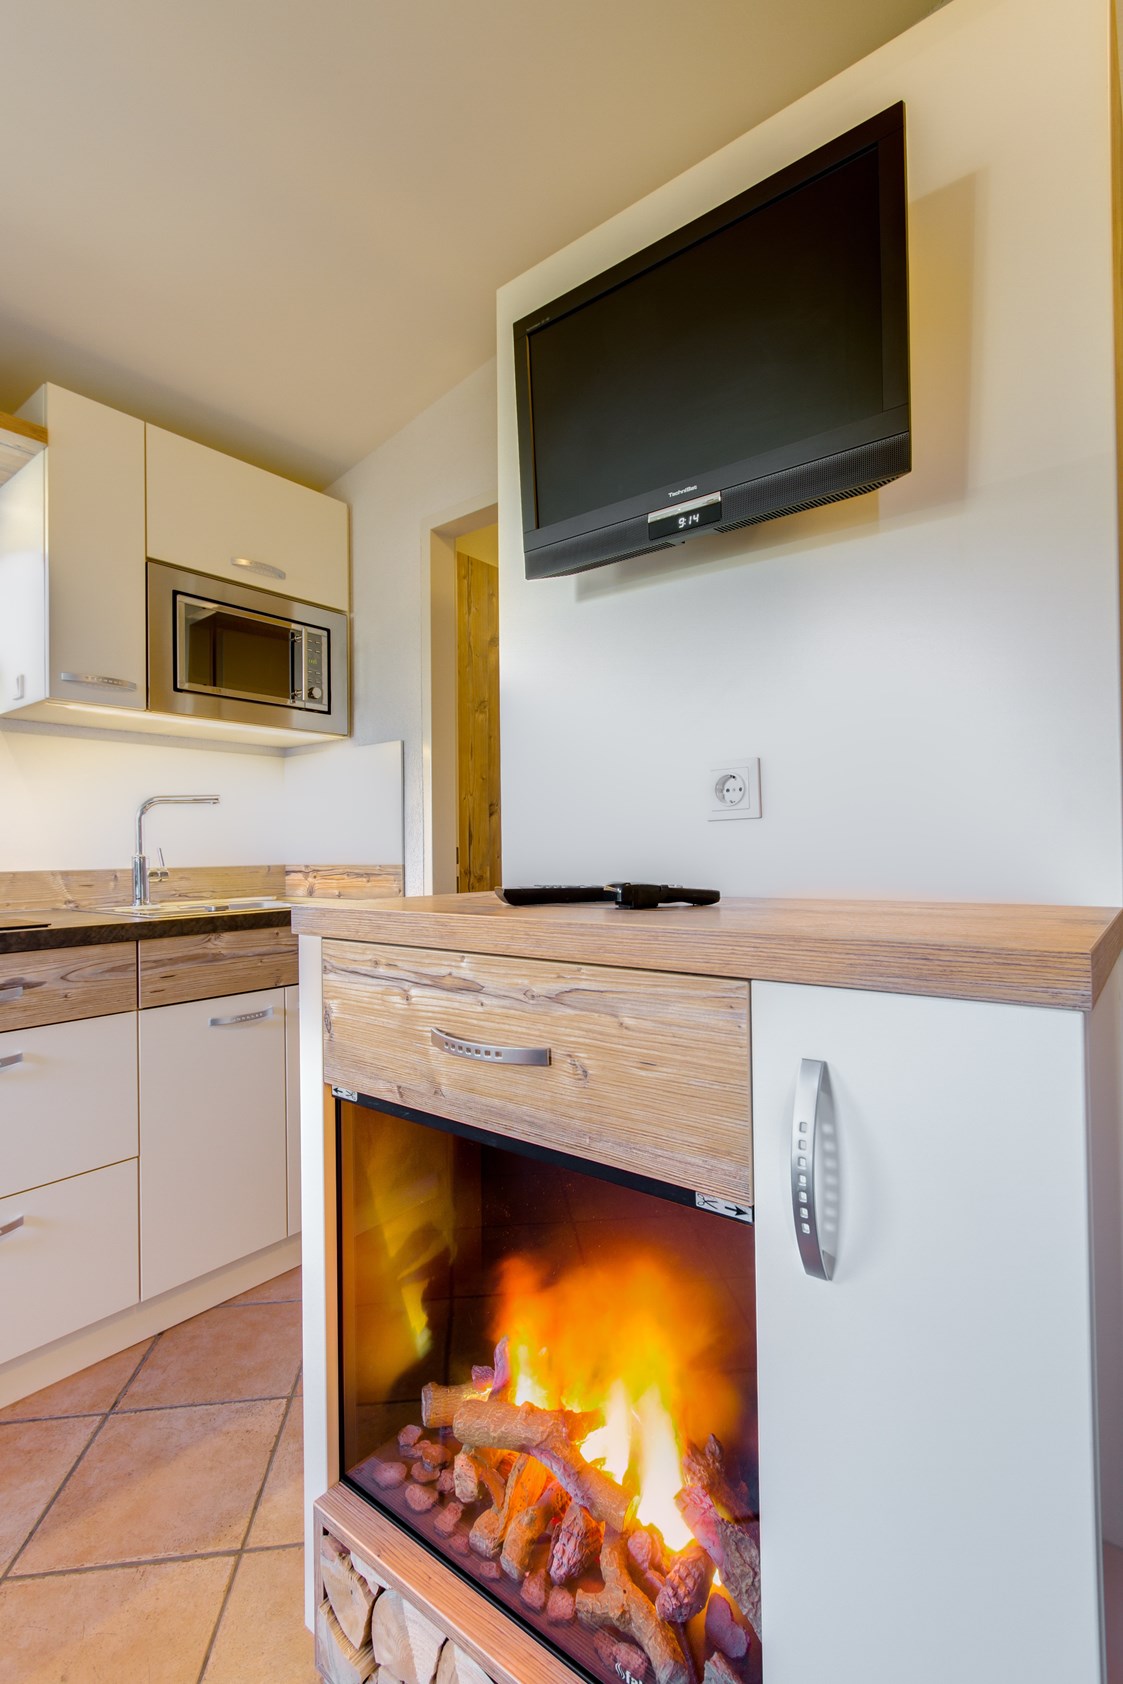 Glamping: Chalet Wohnraum mit artifical fire place - Camping Brunner am See